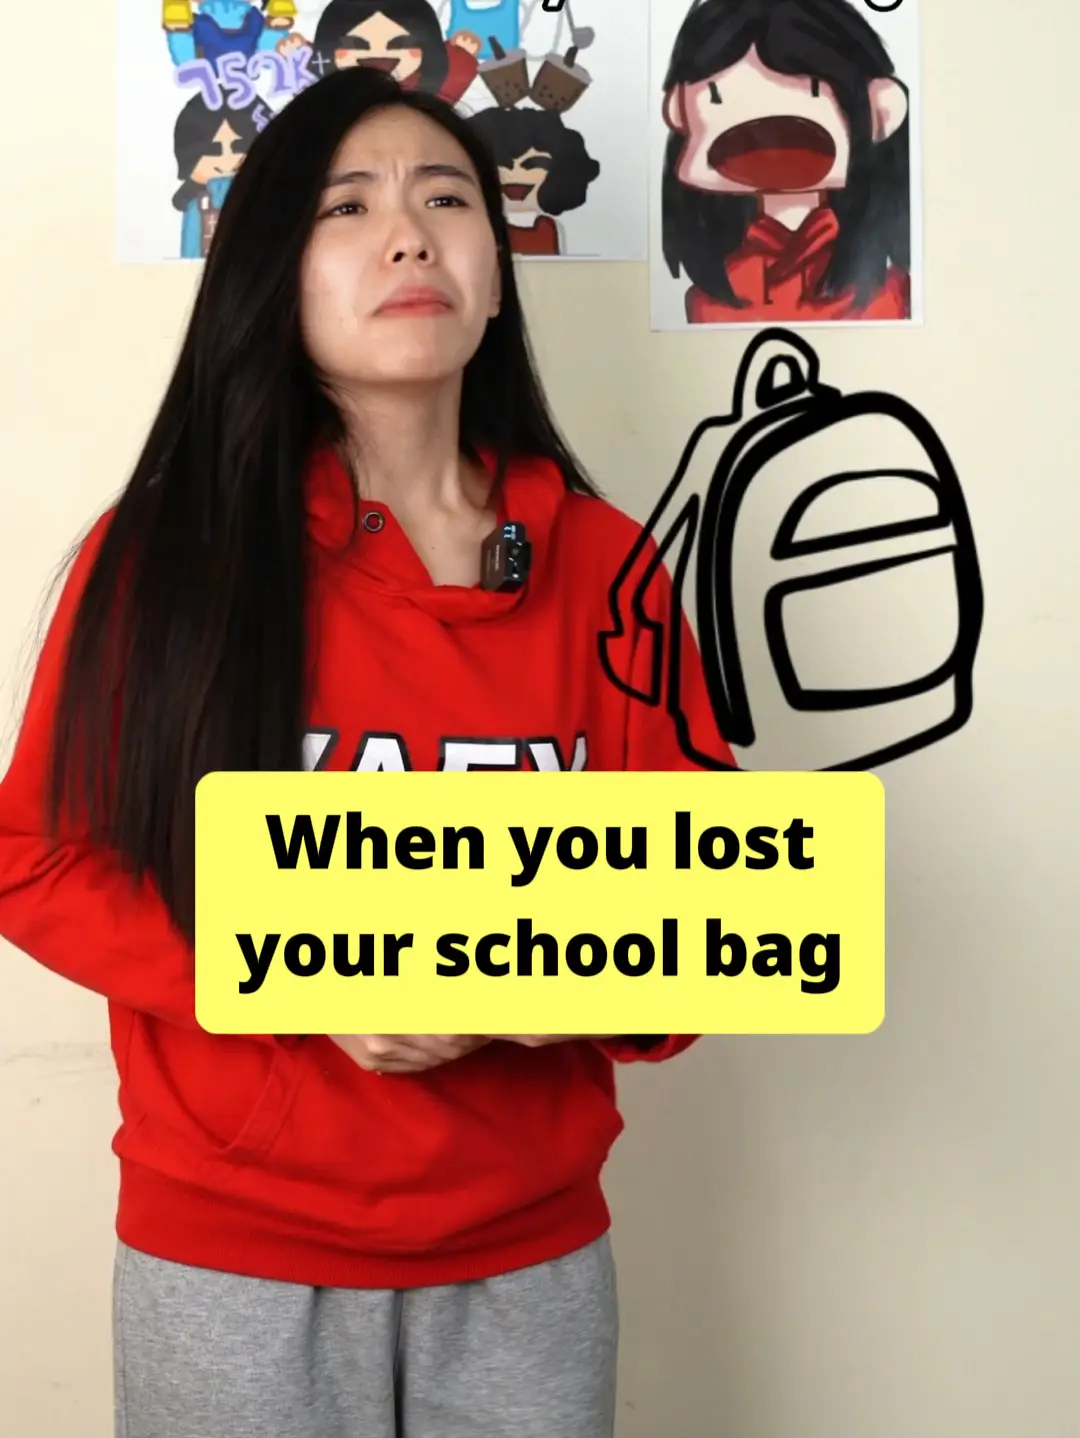 Unit 4 Wheres my schoolbag  ppt video online download